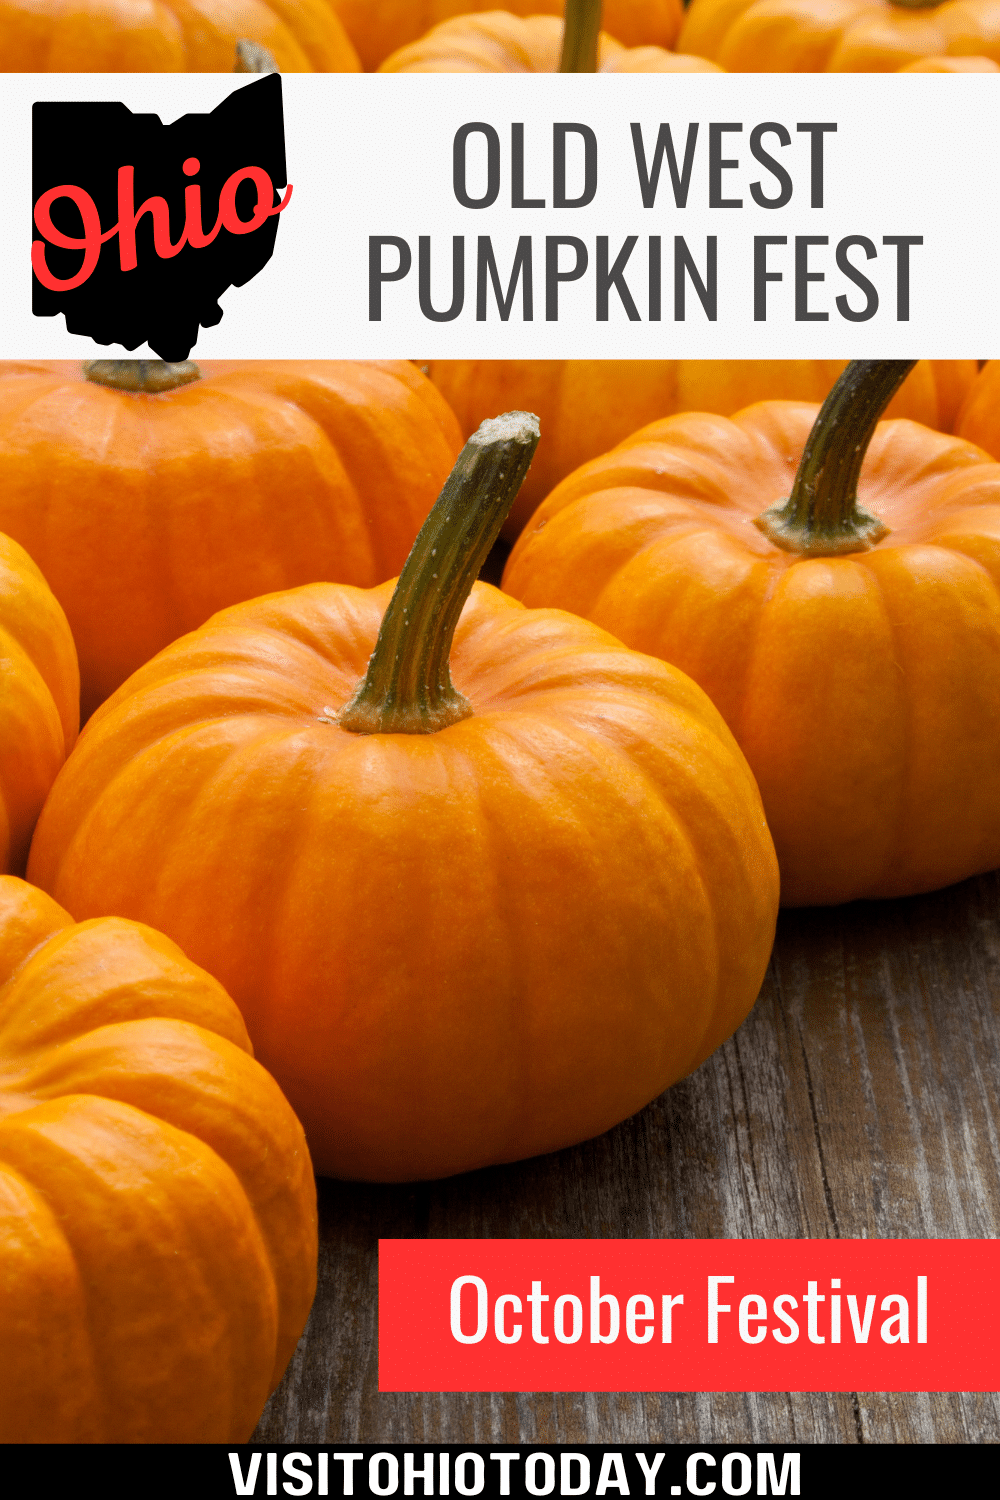 Rockin ‘R Ranch in Columbia Station, Lorain County, presents the Old West Pumpkin Fest which takes place on weekends throughout the fall season, starting Saturday September 23 and finishing Sunday October 29.